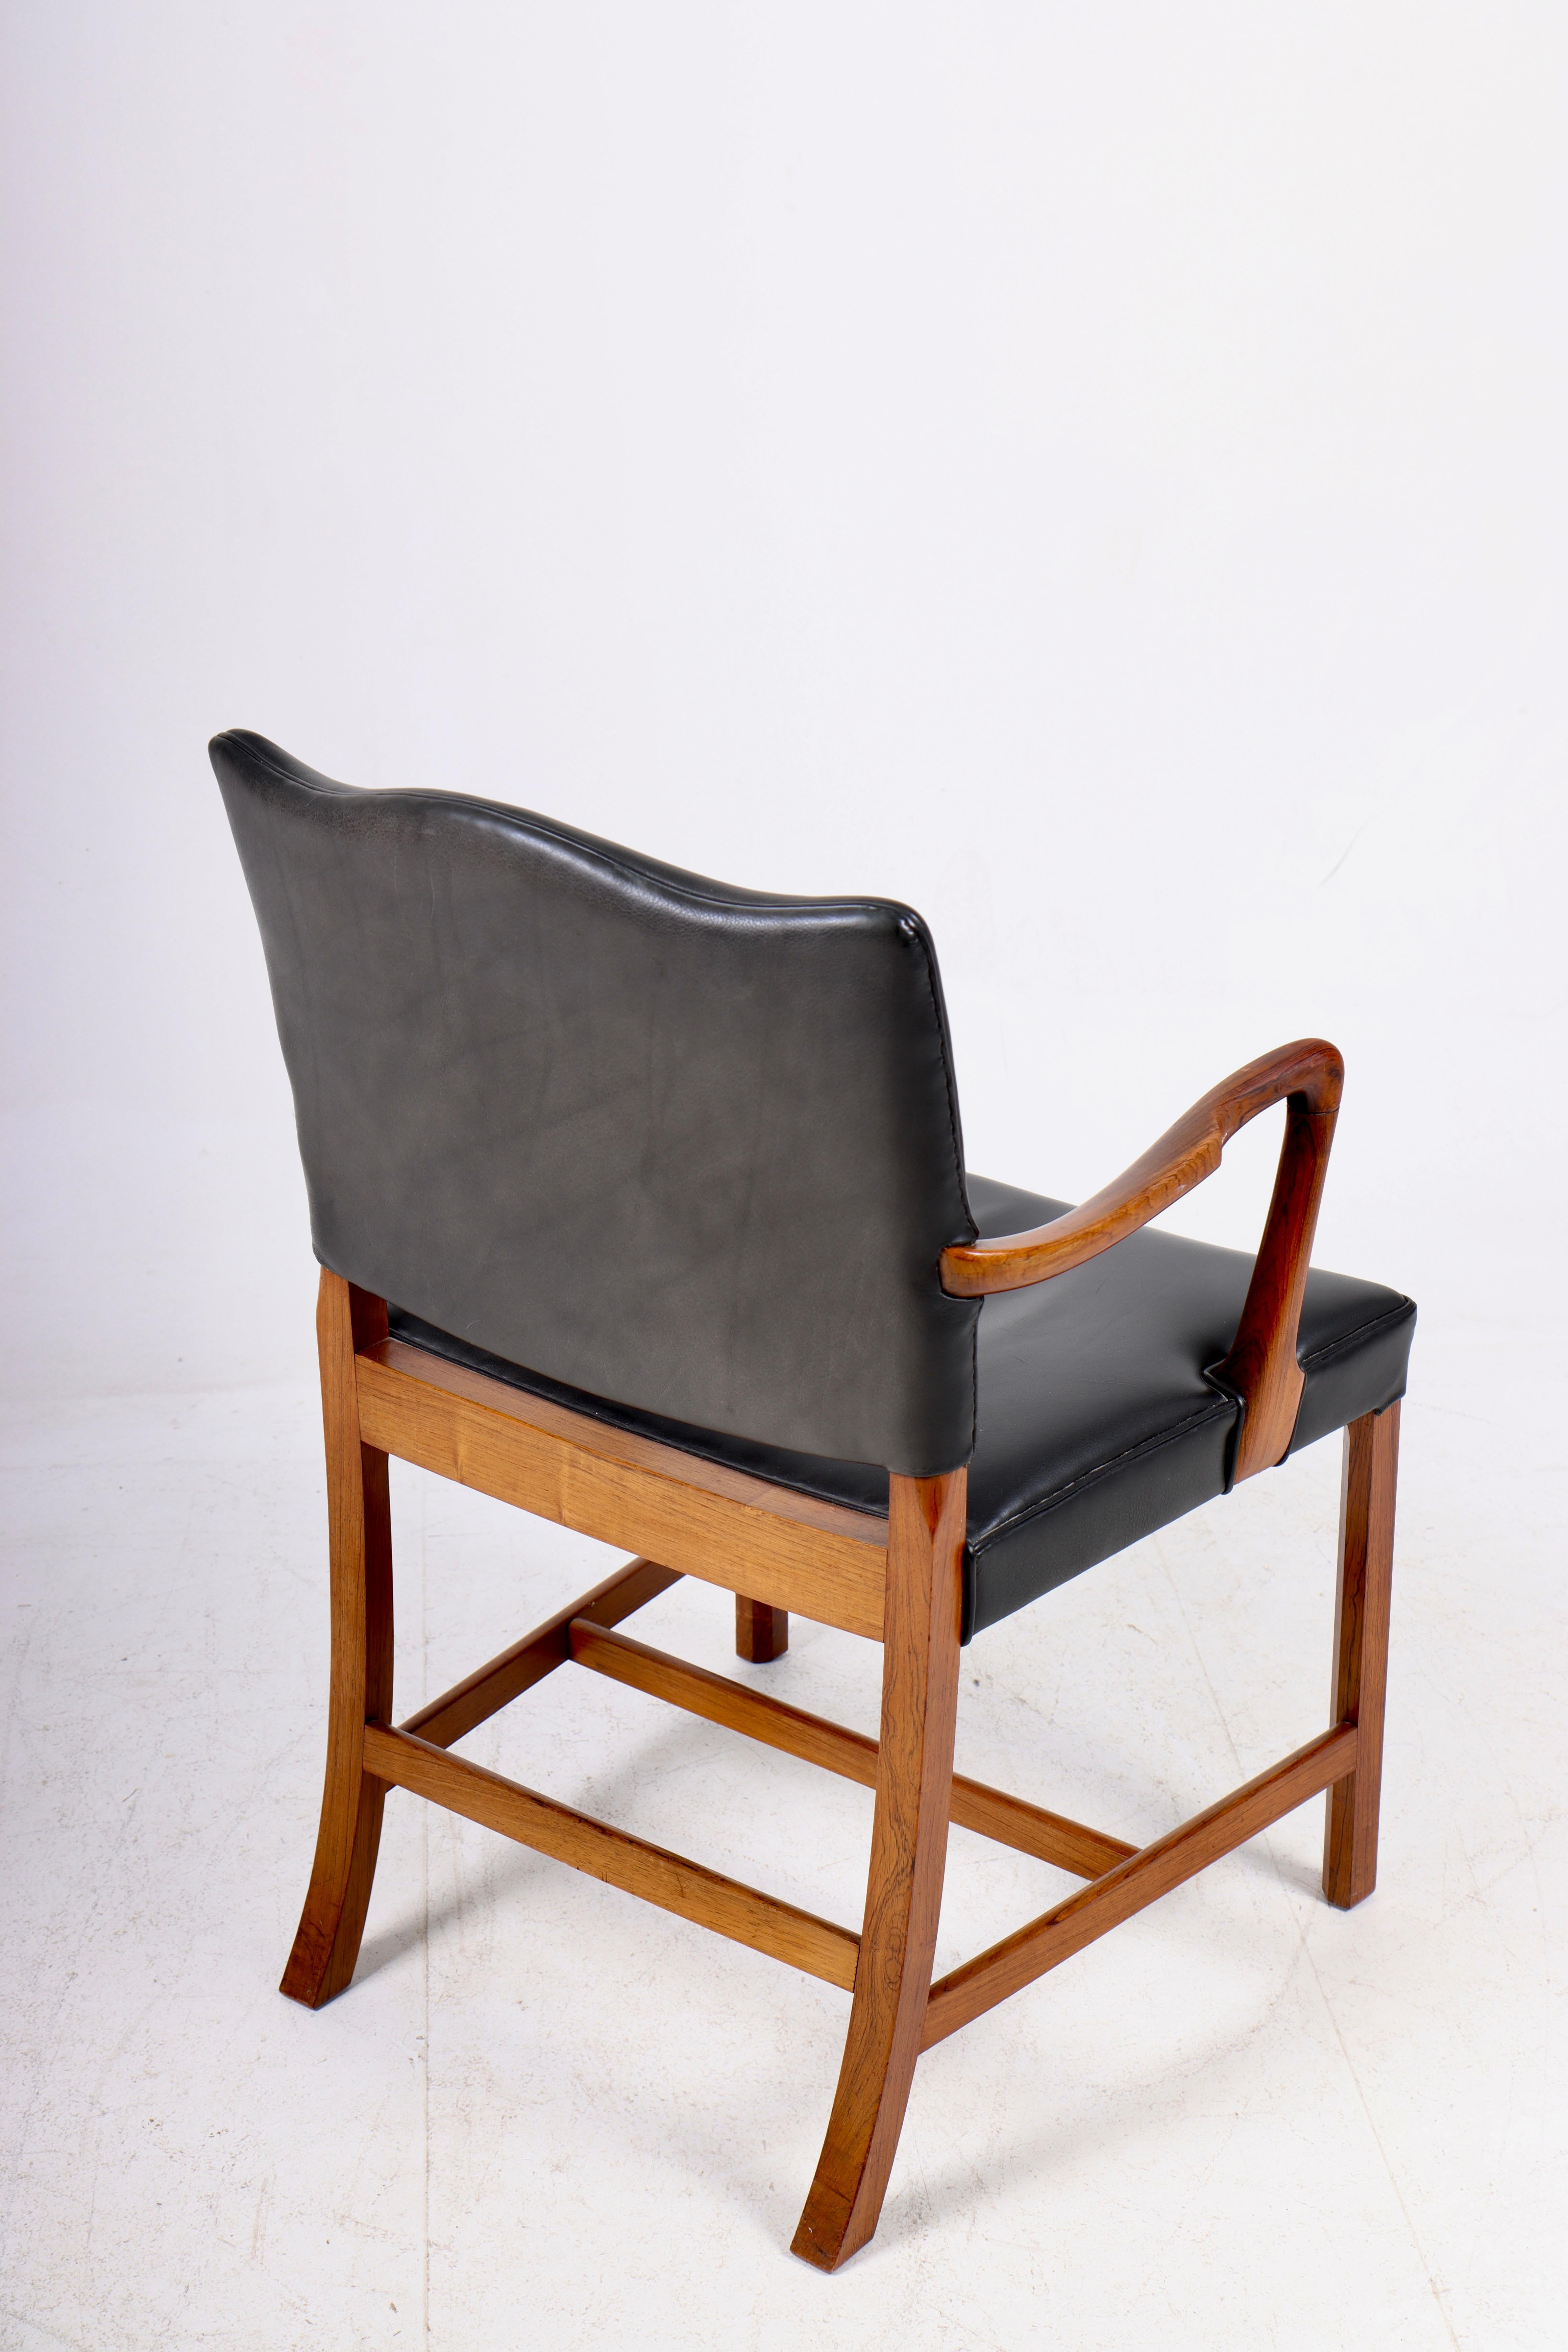 Mid-Century Armchair in Rosewood Designed by Ole Wanscher, Danish Design, 1950s For Sale 2